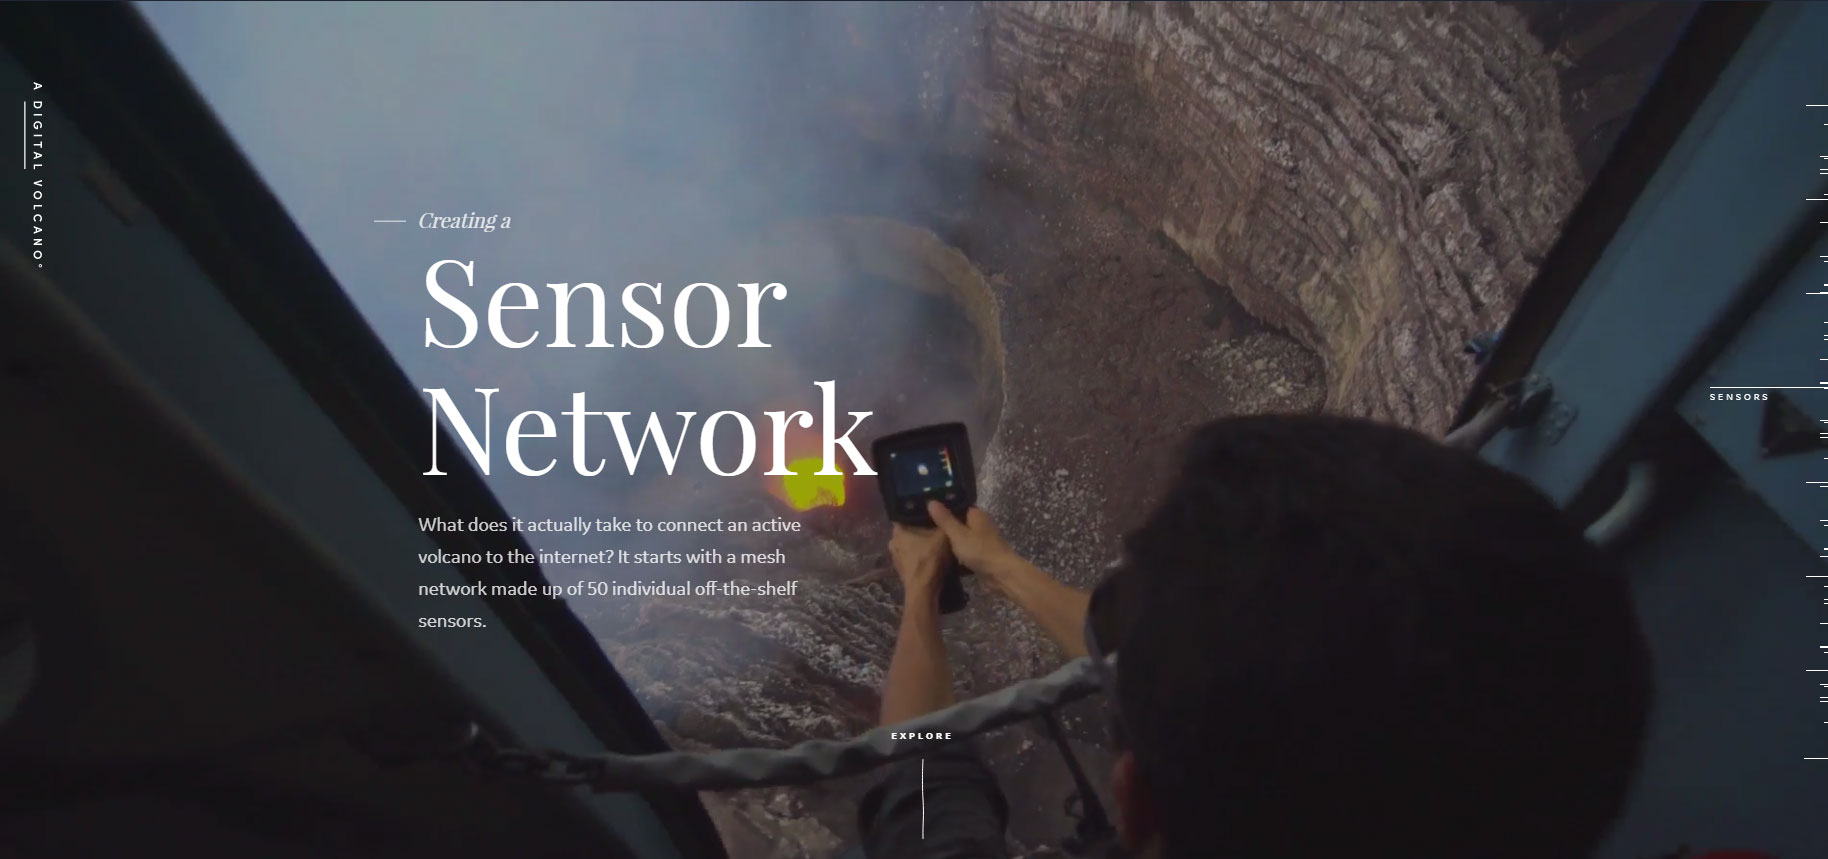 A Digital Volcano - Website of the Day